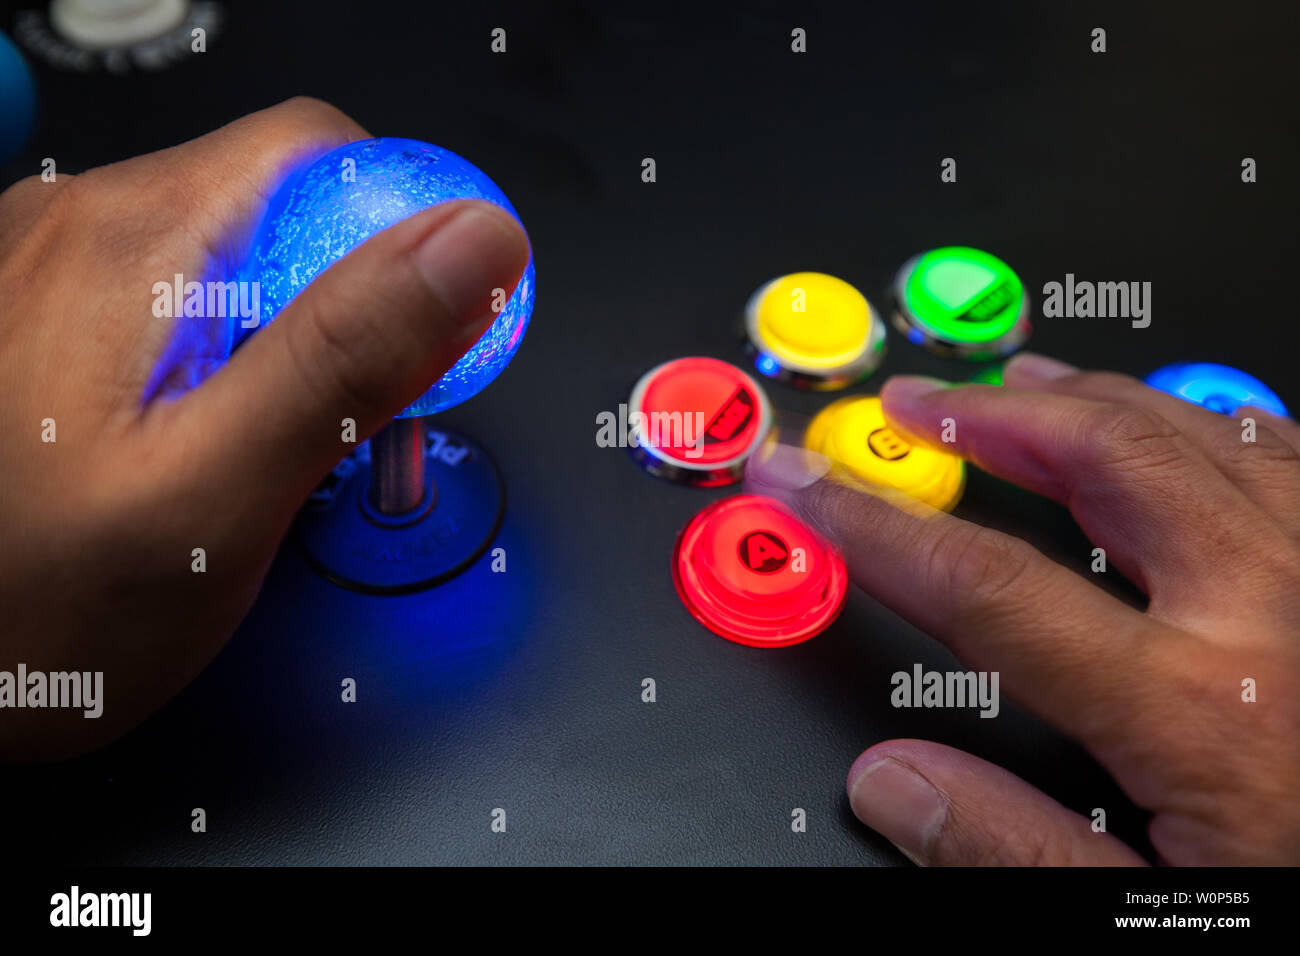 Arcade gamer using a lighted joystick and fighter button layout with neo geo color scheme. Stock Photo